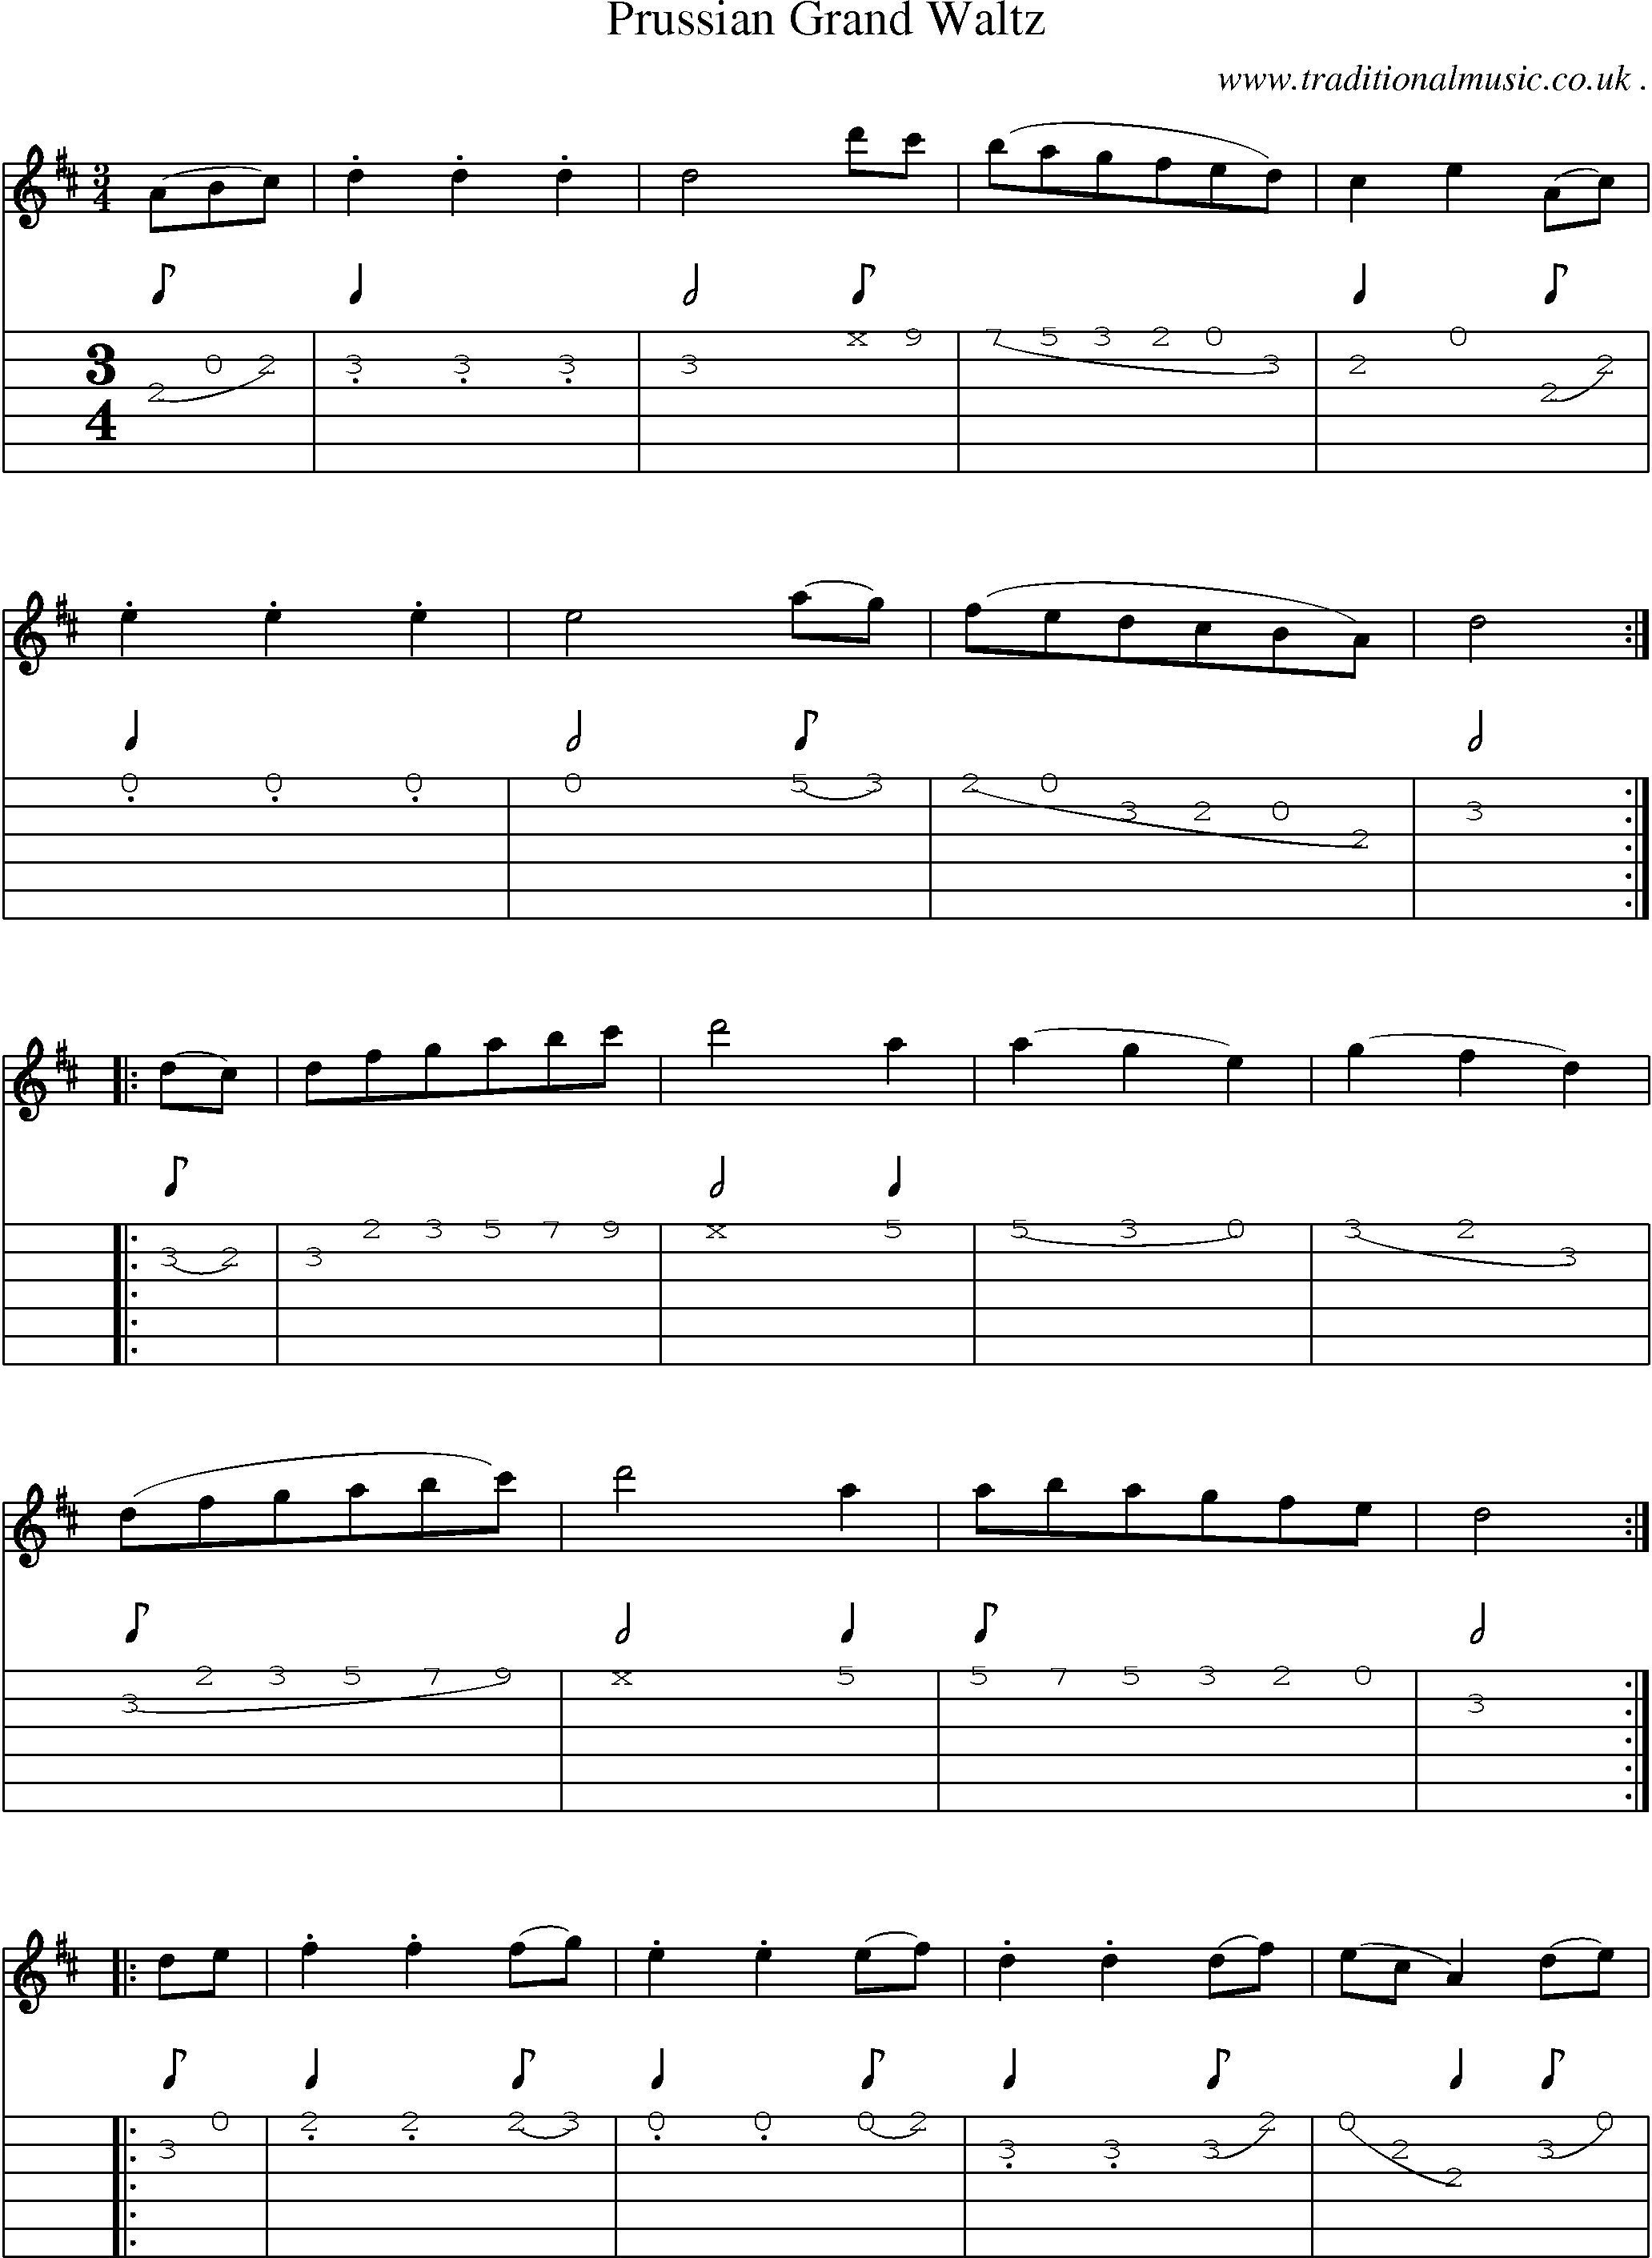 Sheet-Music and Guitar Tabs for Prussian Grand Waltz